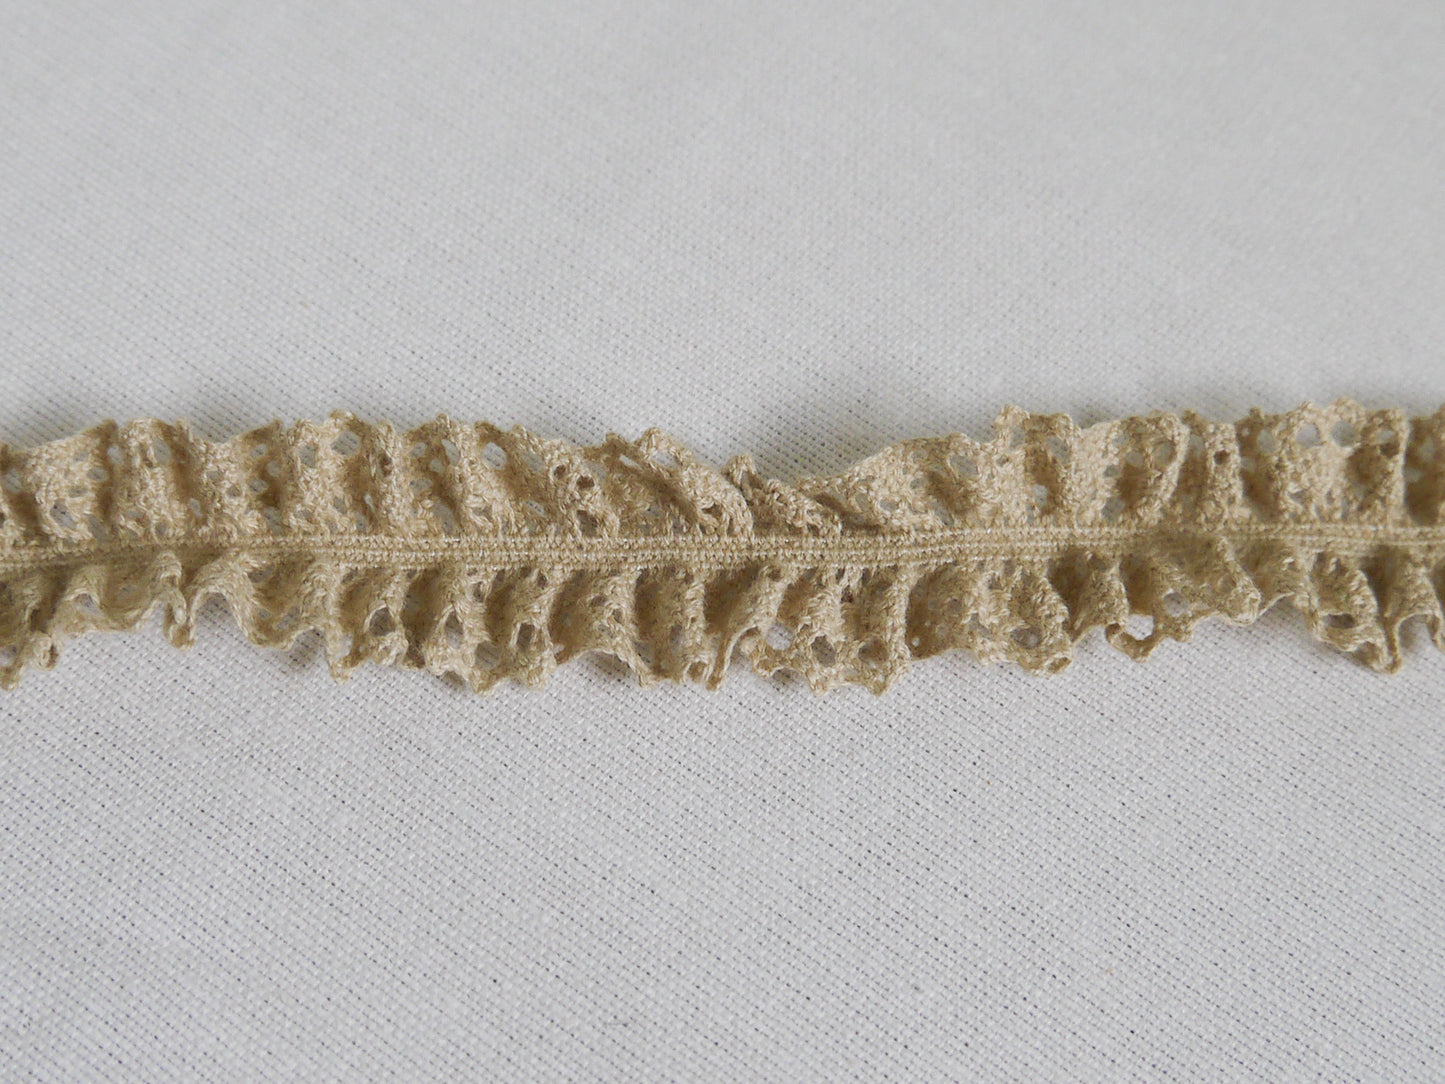 24mm elastic lace ribbon in organic cotton